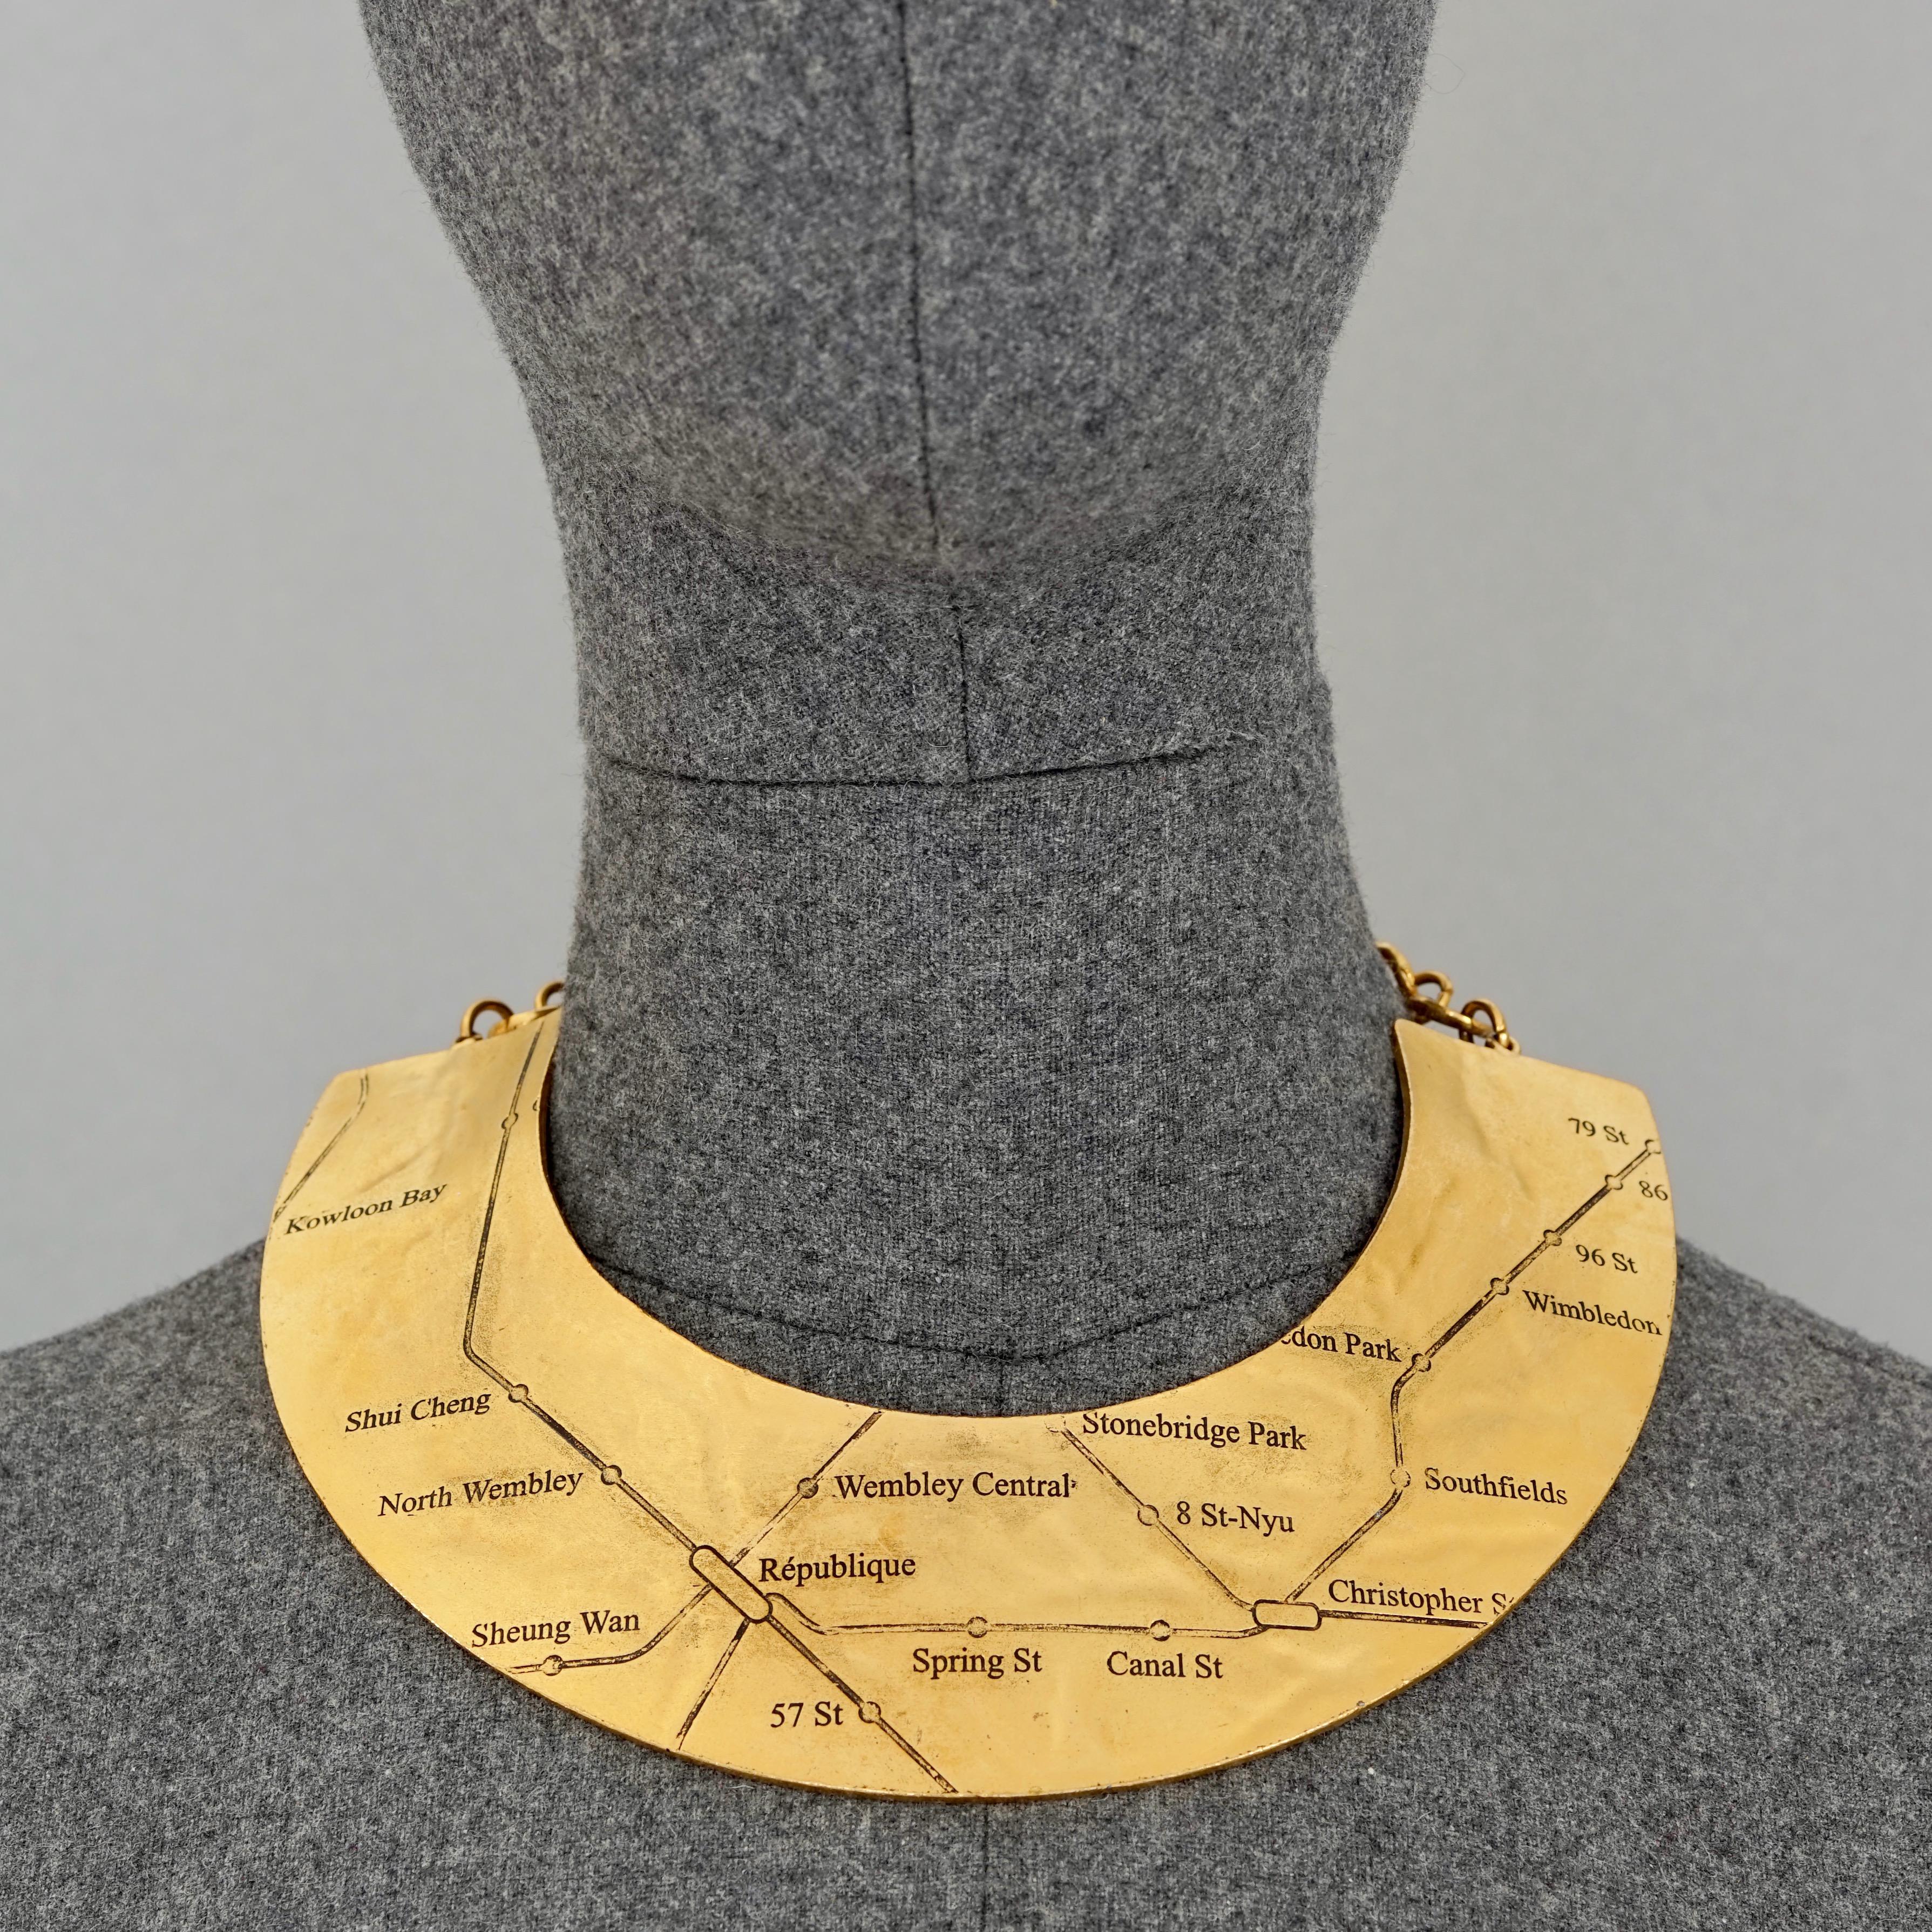 Vintage BICHE DE BERE Modernist Underground Map Novelty Wide Choker Necklace

Measurements:
Height: 1.97 inches (5 cm)
Wearable Length: 12.66 inches (32.16 cm) max including the chain

Limited edition. This is the 26th out of 489